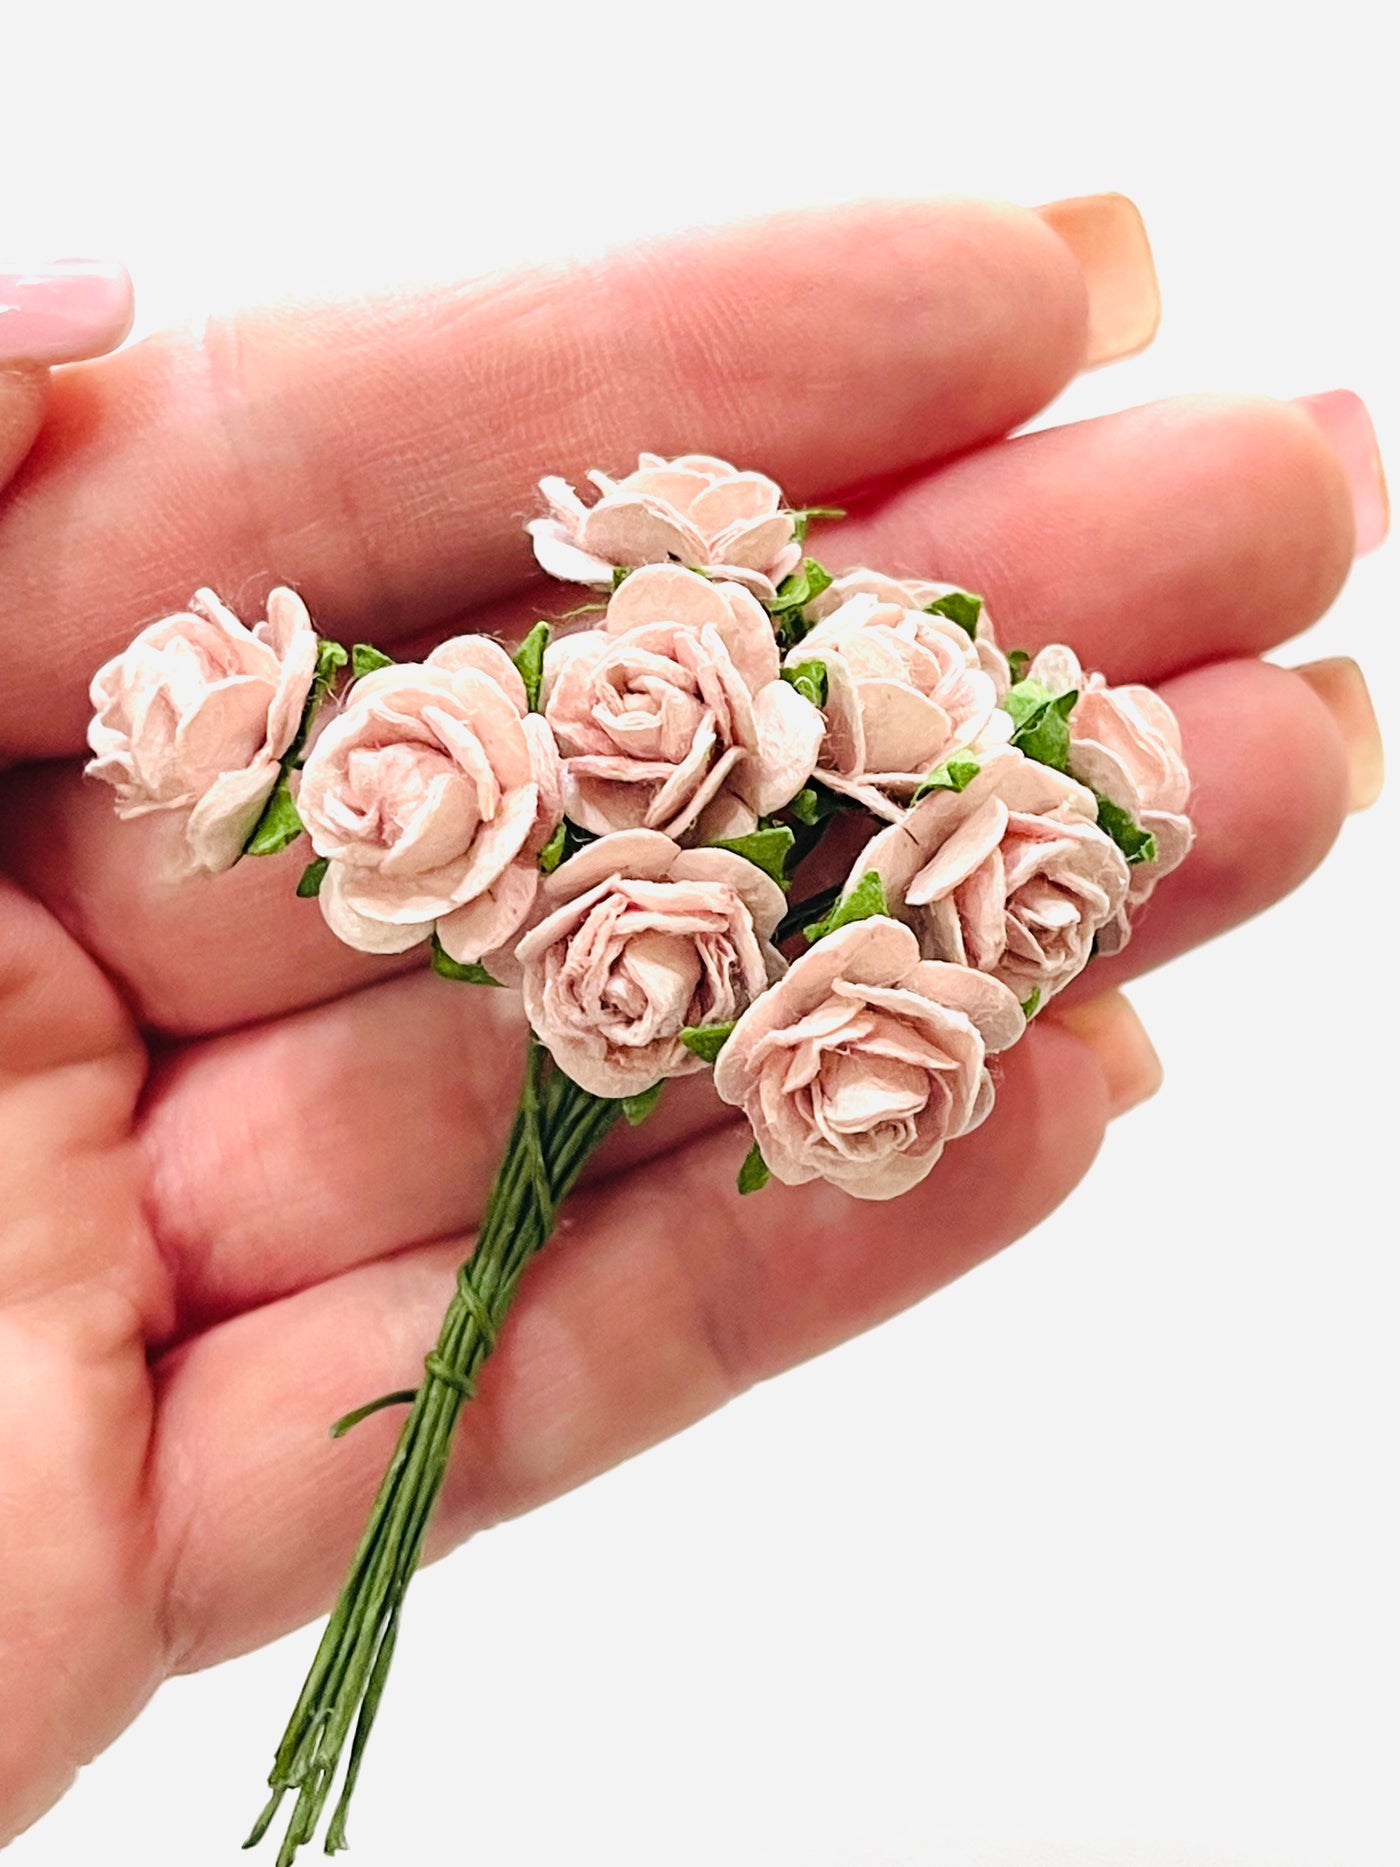 10 Pcs Rose Ash Mulberry Paper Flowers - 1.5cm Rounded Petal Roses